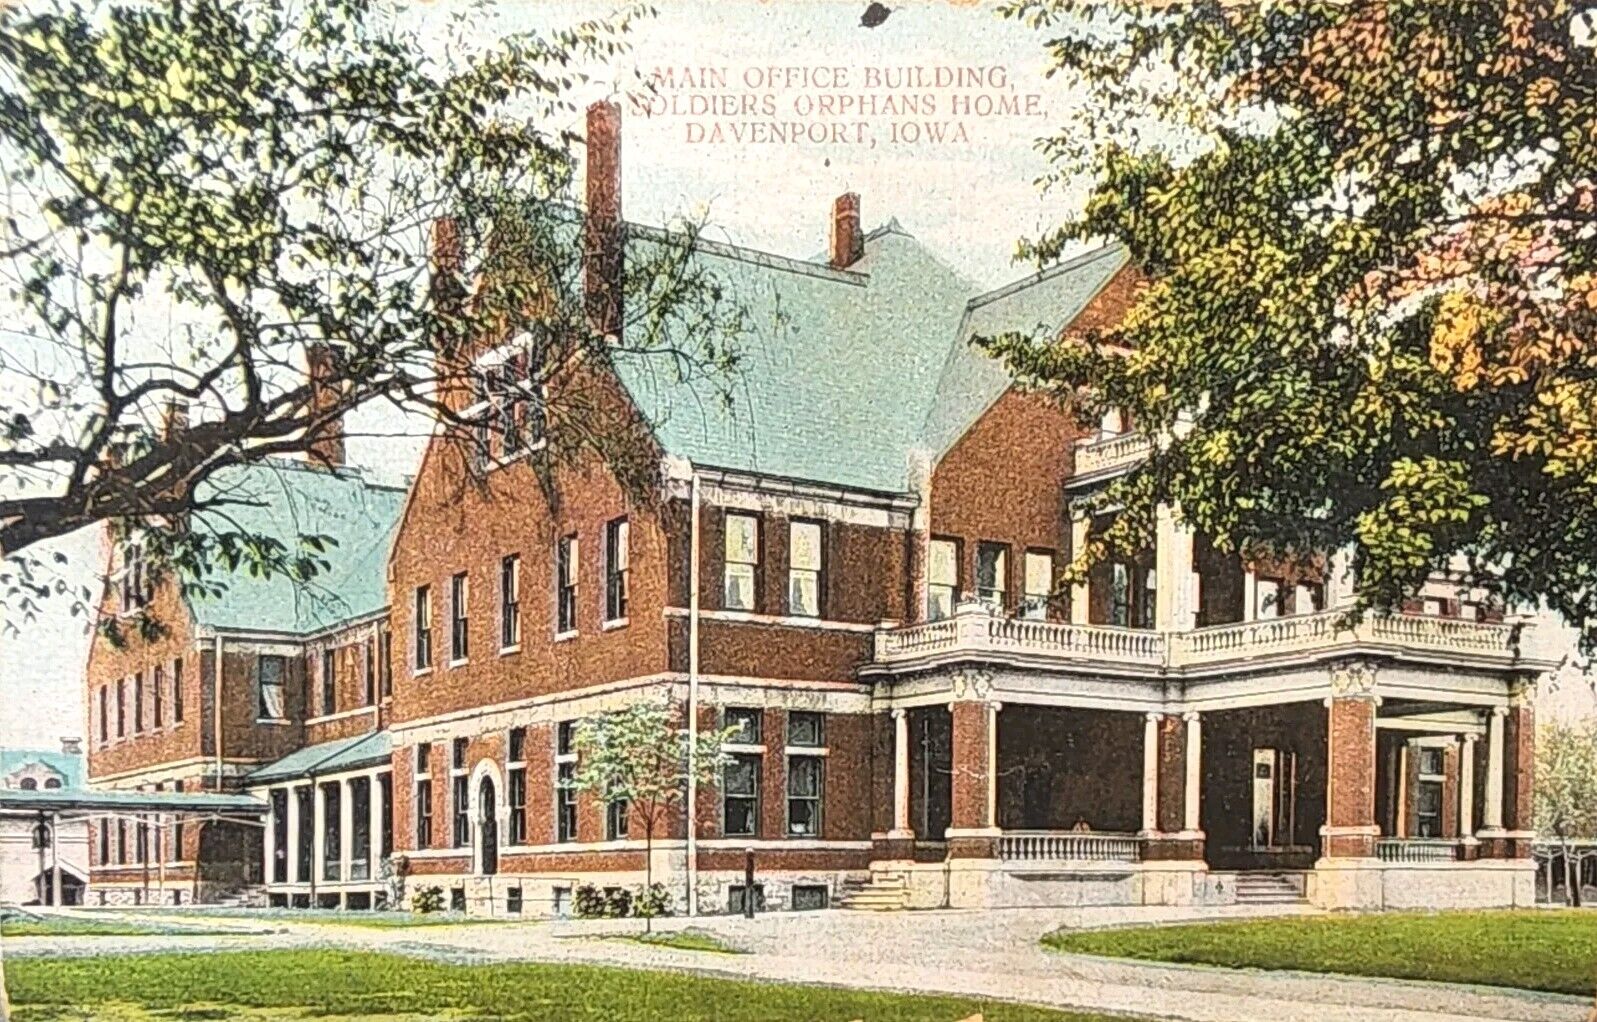 1909 Postcard ~ Main Office of Soldiers Orphans Home In Davenport, Iowa. #-4909